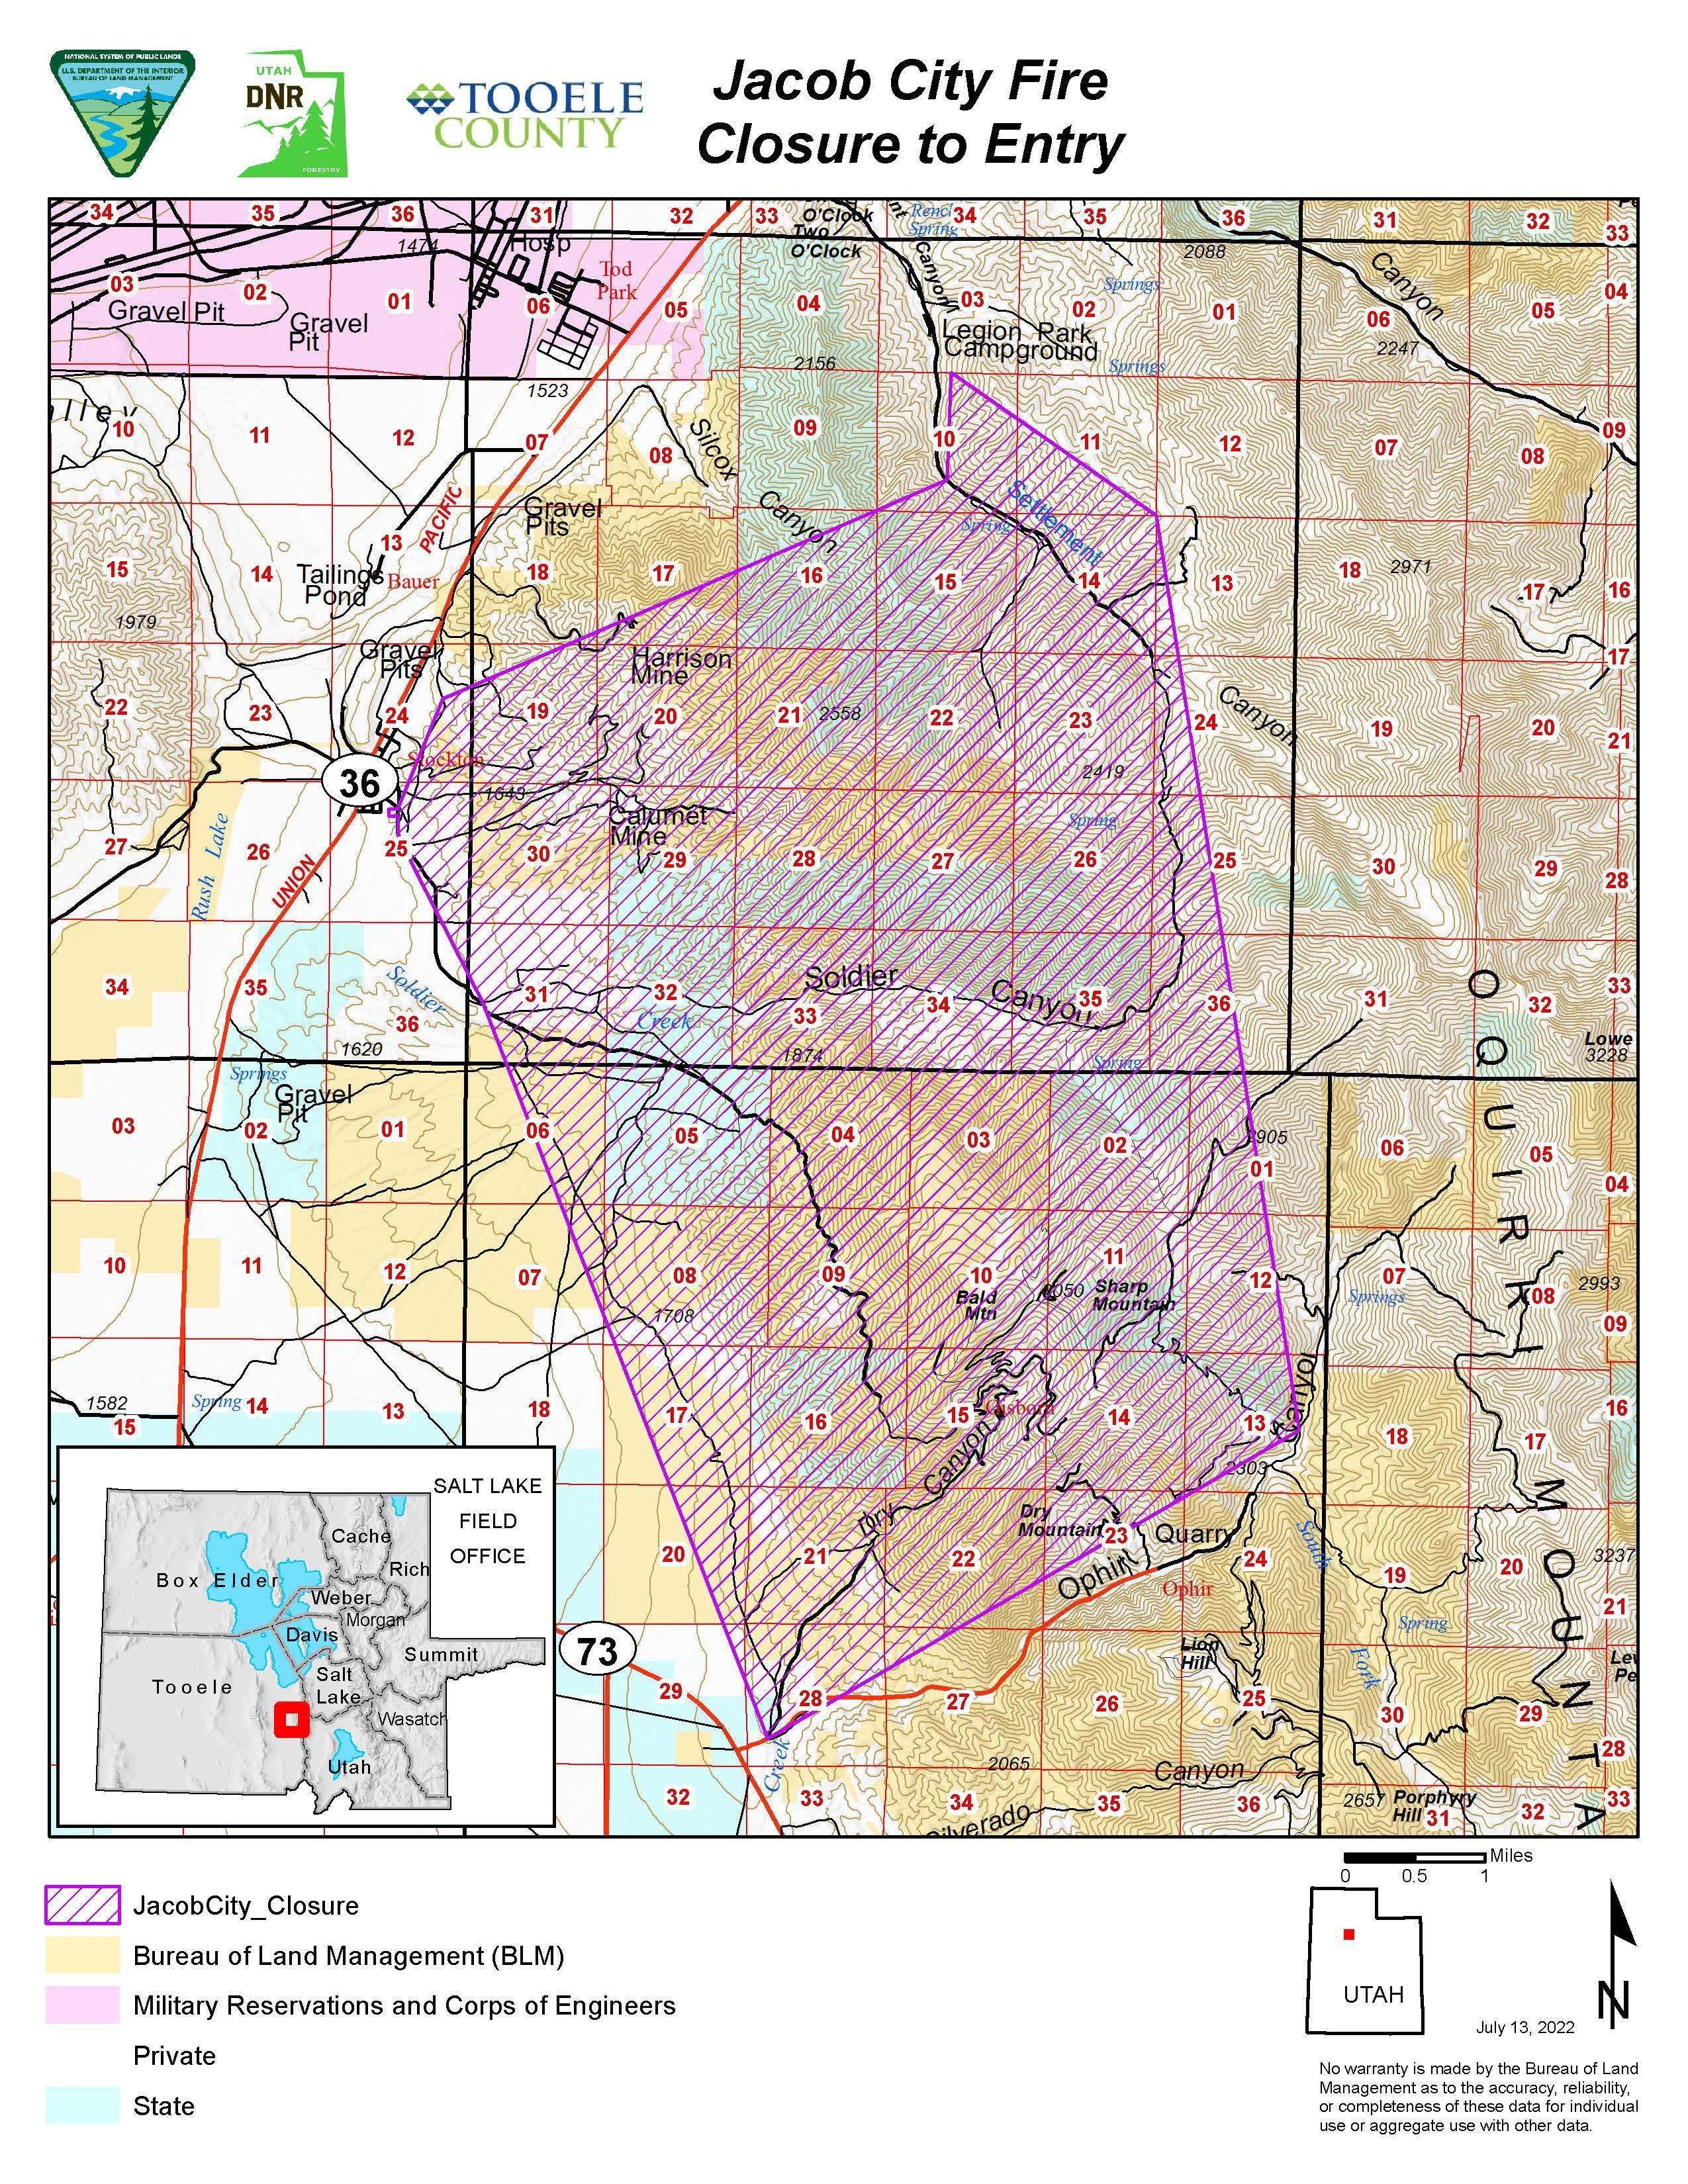 July 13 Fire Prevention Order Map